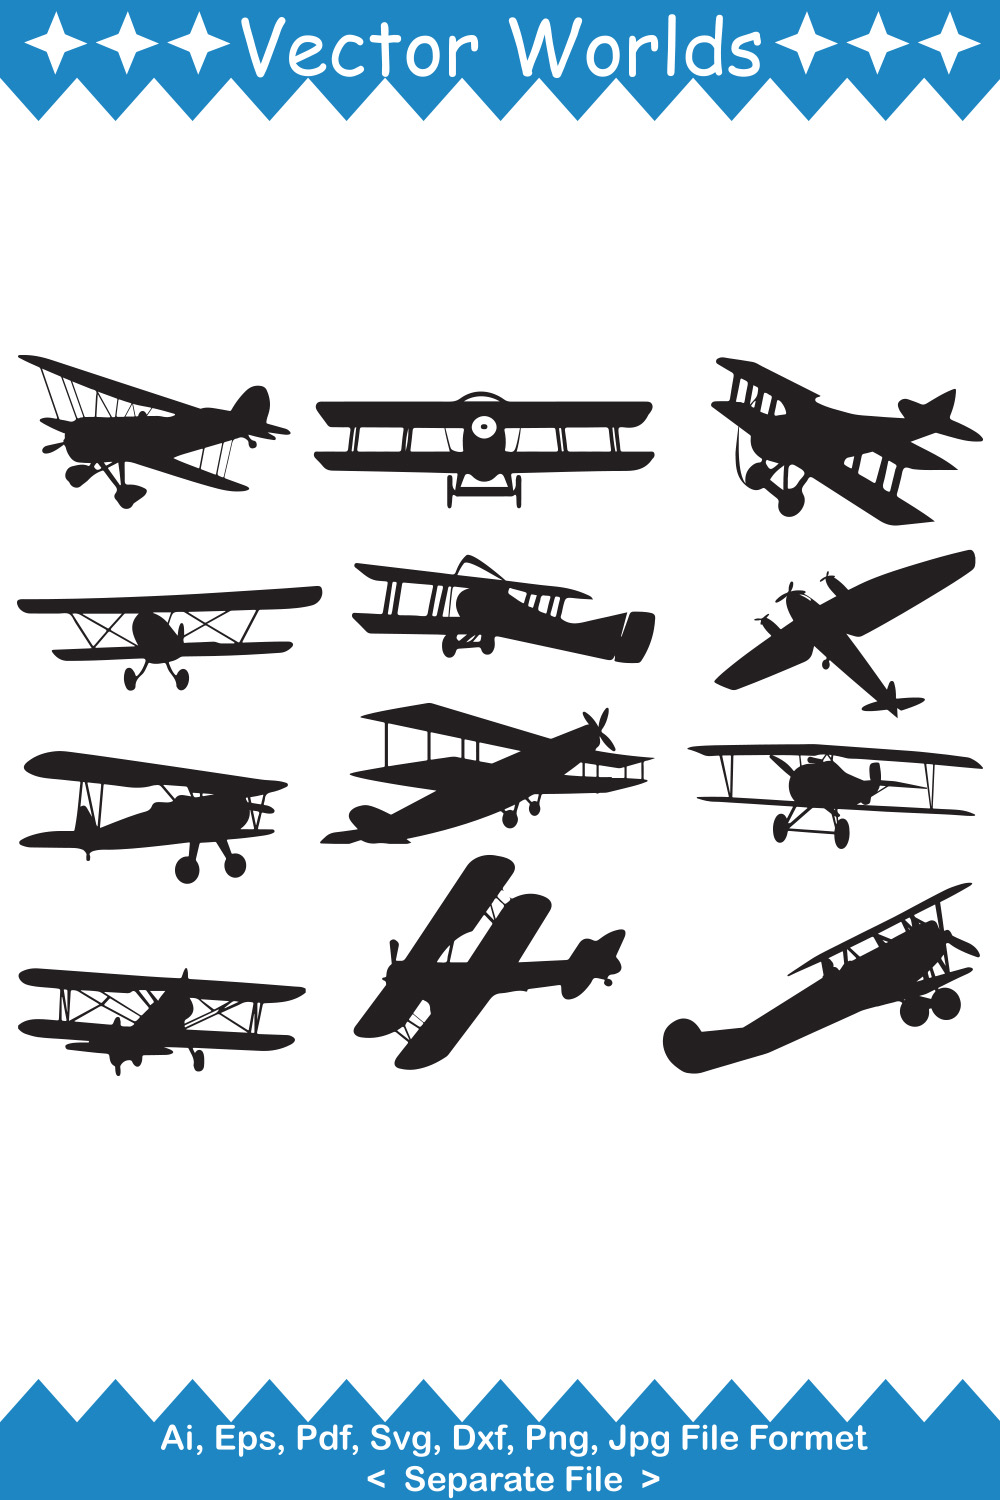 A selection of vector wonderful images of the silhouette of biplanes.